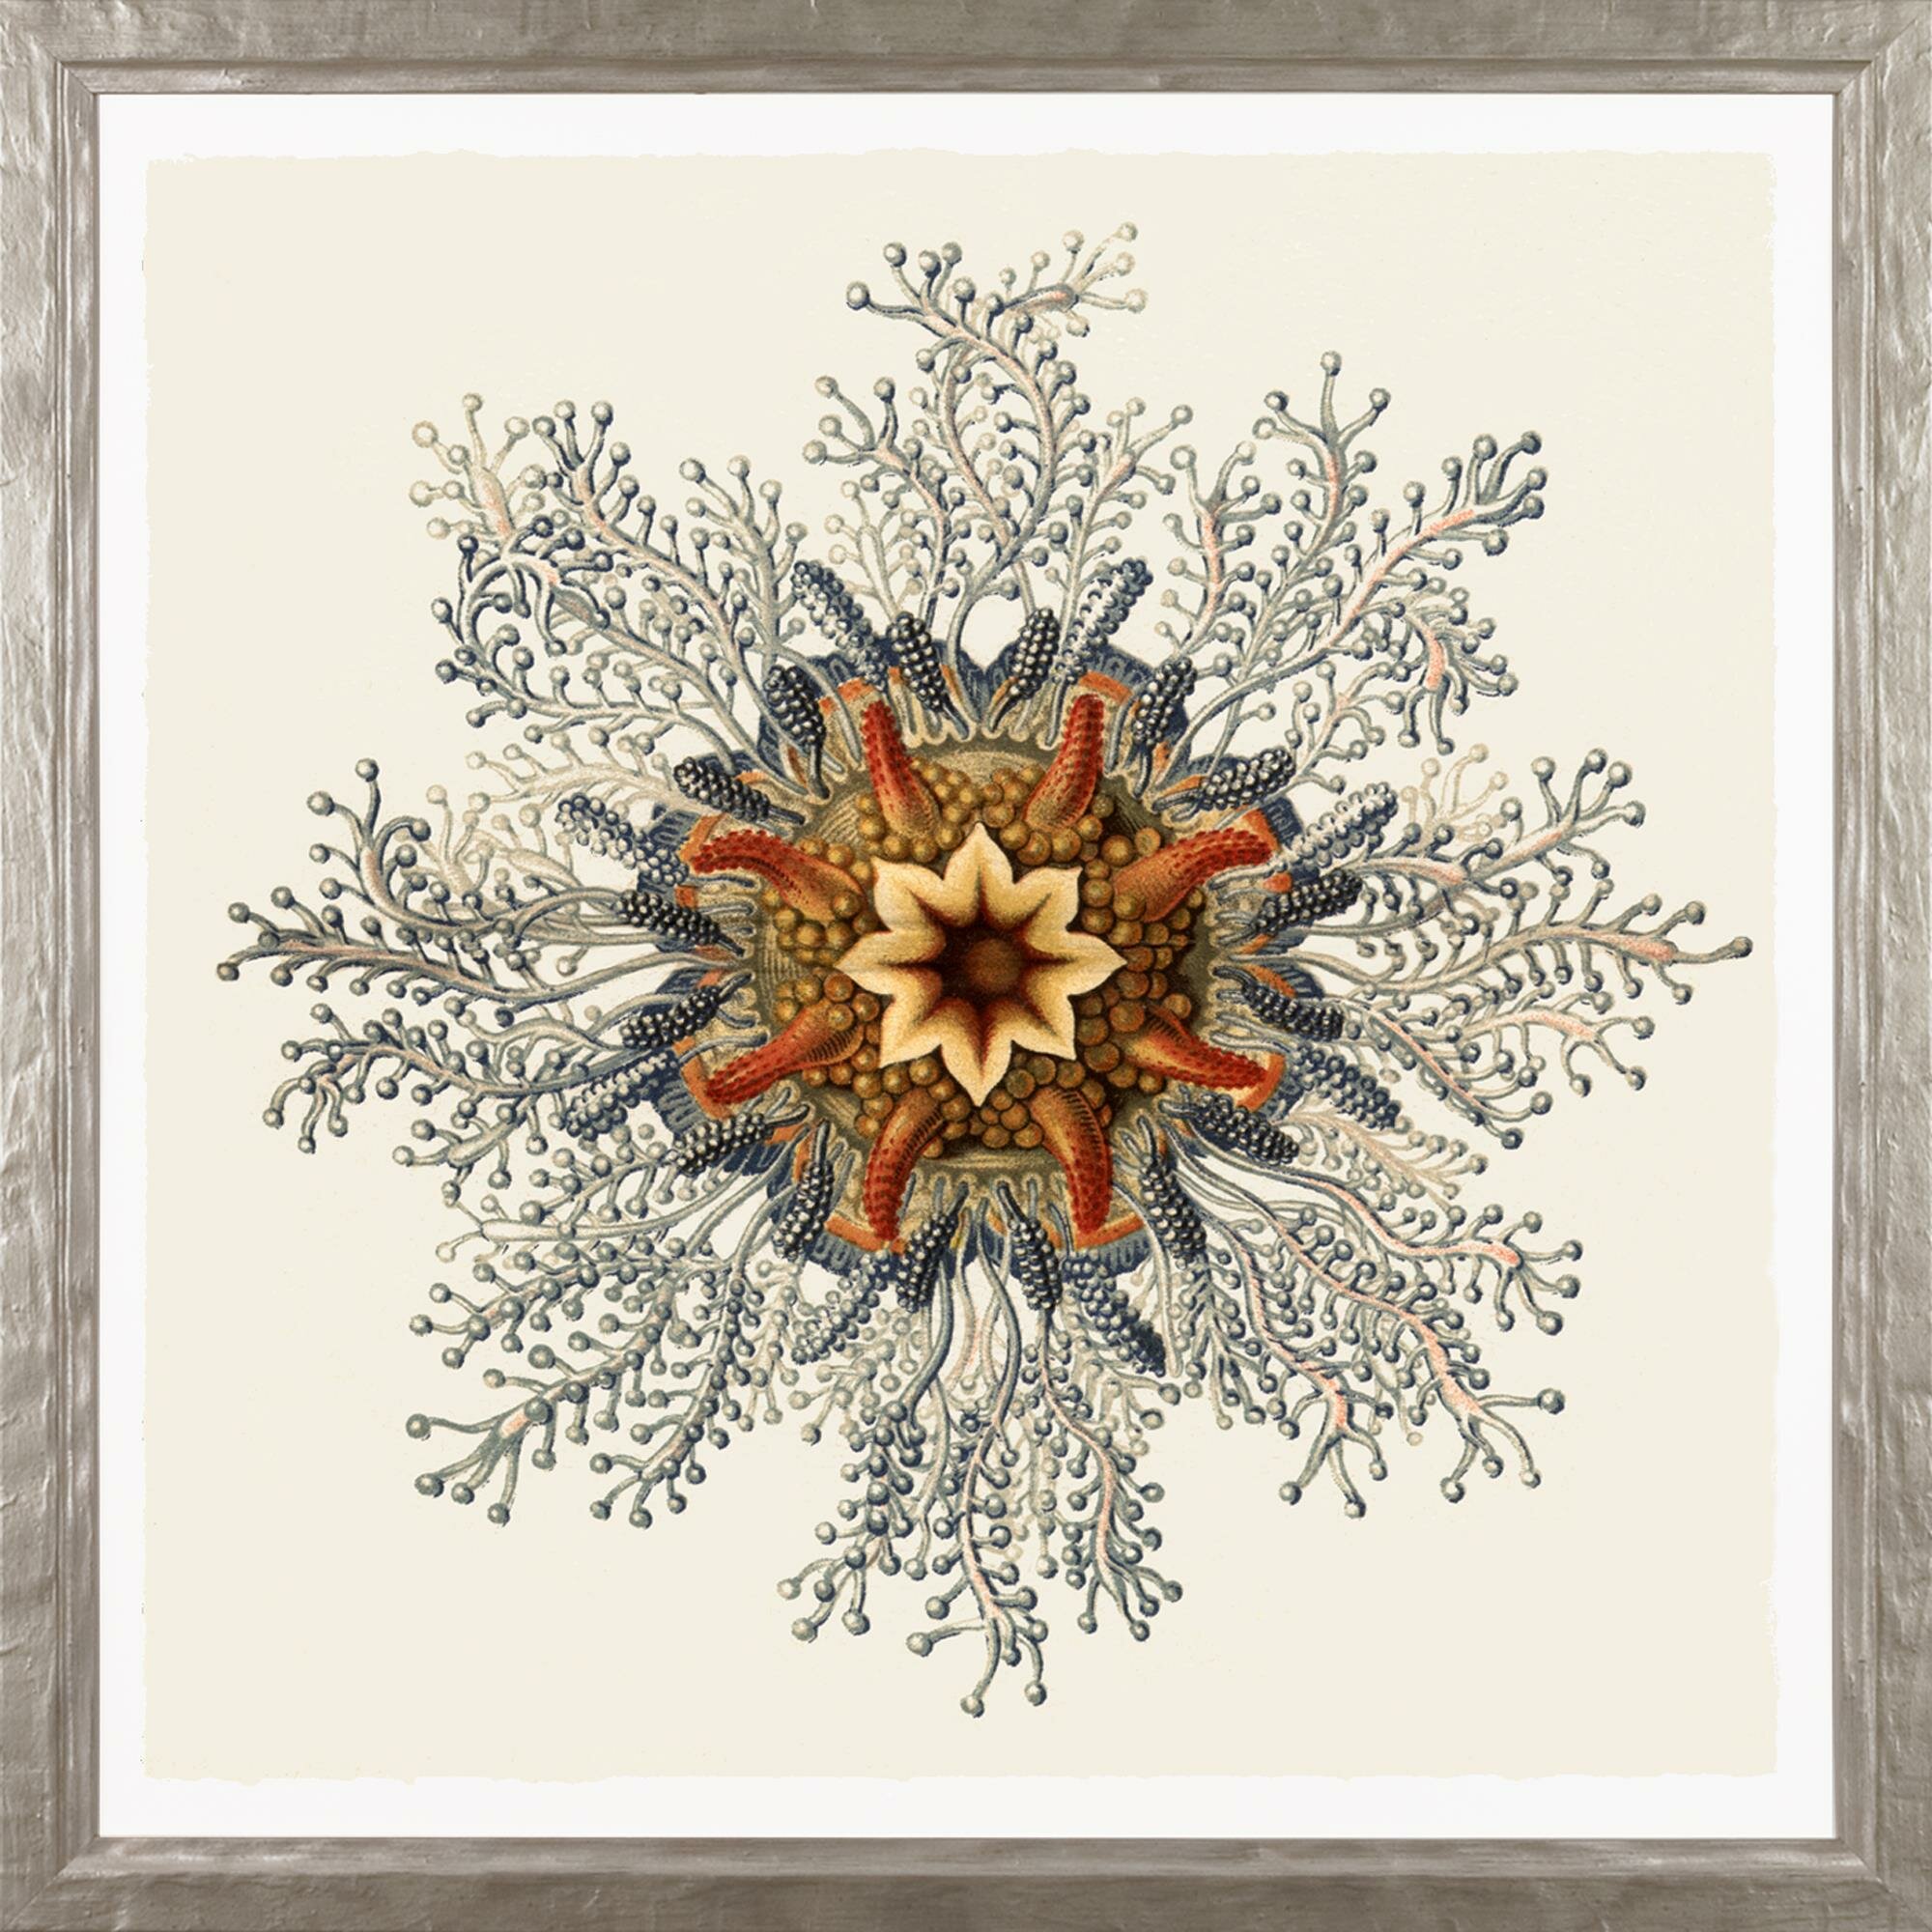 Art Virtuoso Art Forms In Nature By Ernst Haeckel Picture Frame Graphic Art Print On Paper Wayfair